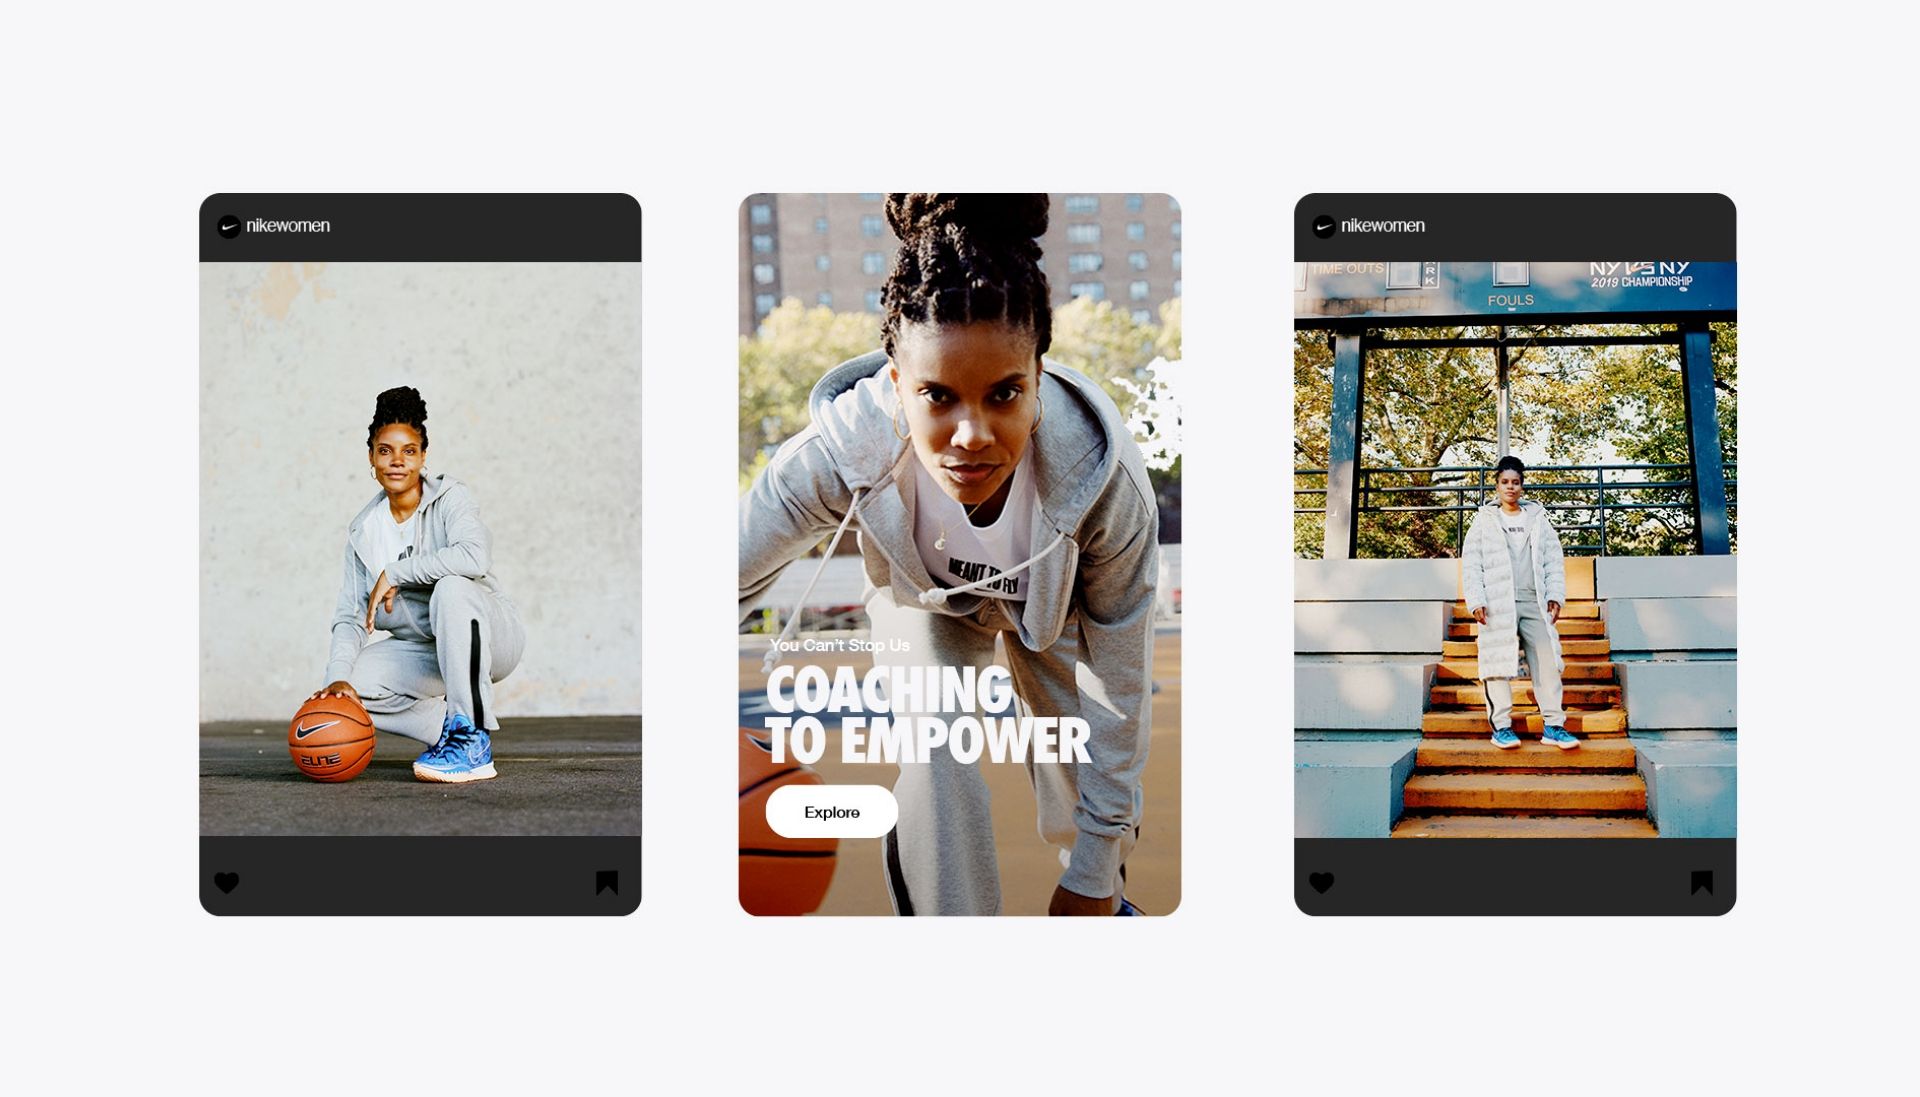 Social posts from @nikewomen featuring Chiene Joy Jones posing with basketball and on stadium stairs wearing gray nike training clothing. You can't stop us. Coaching to Empower